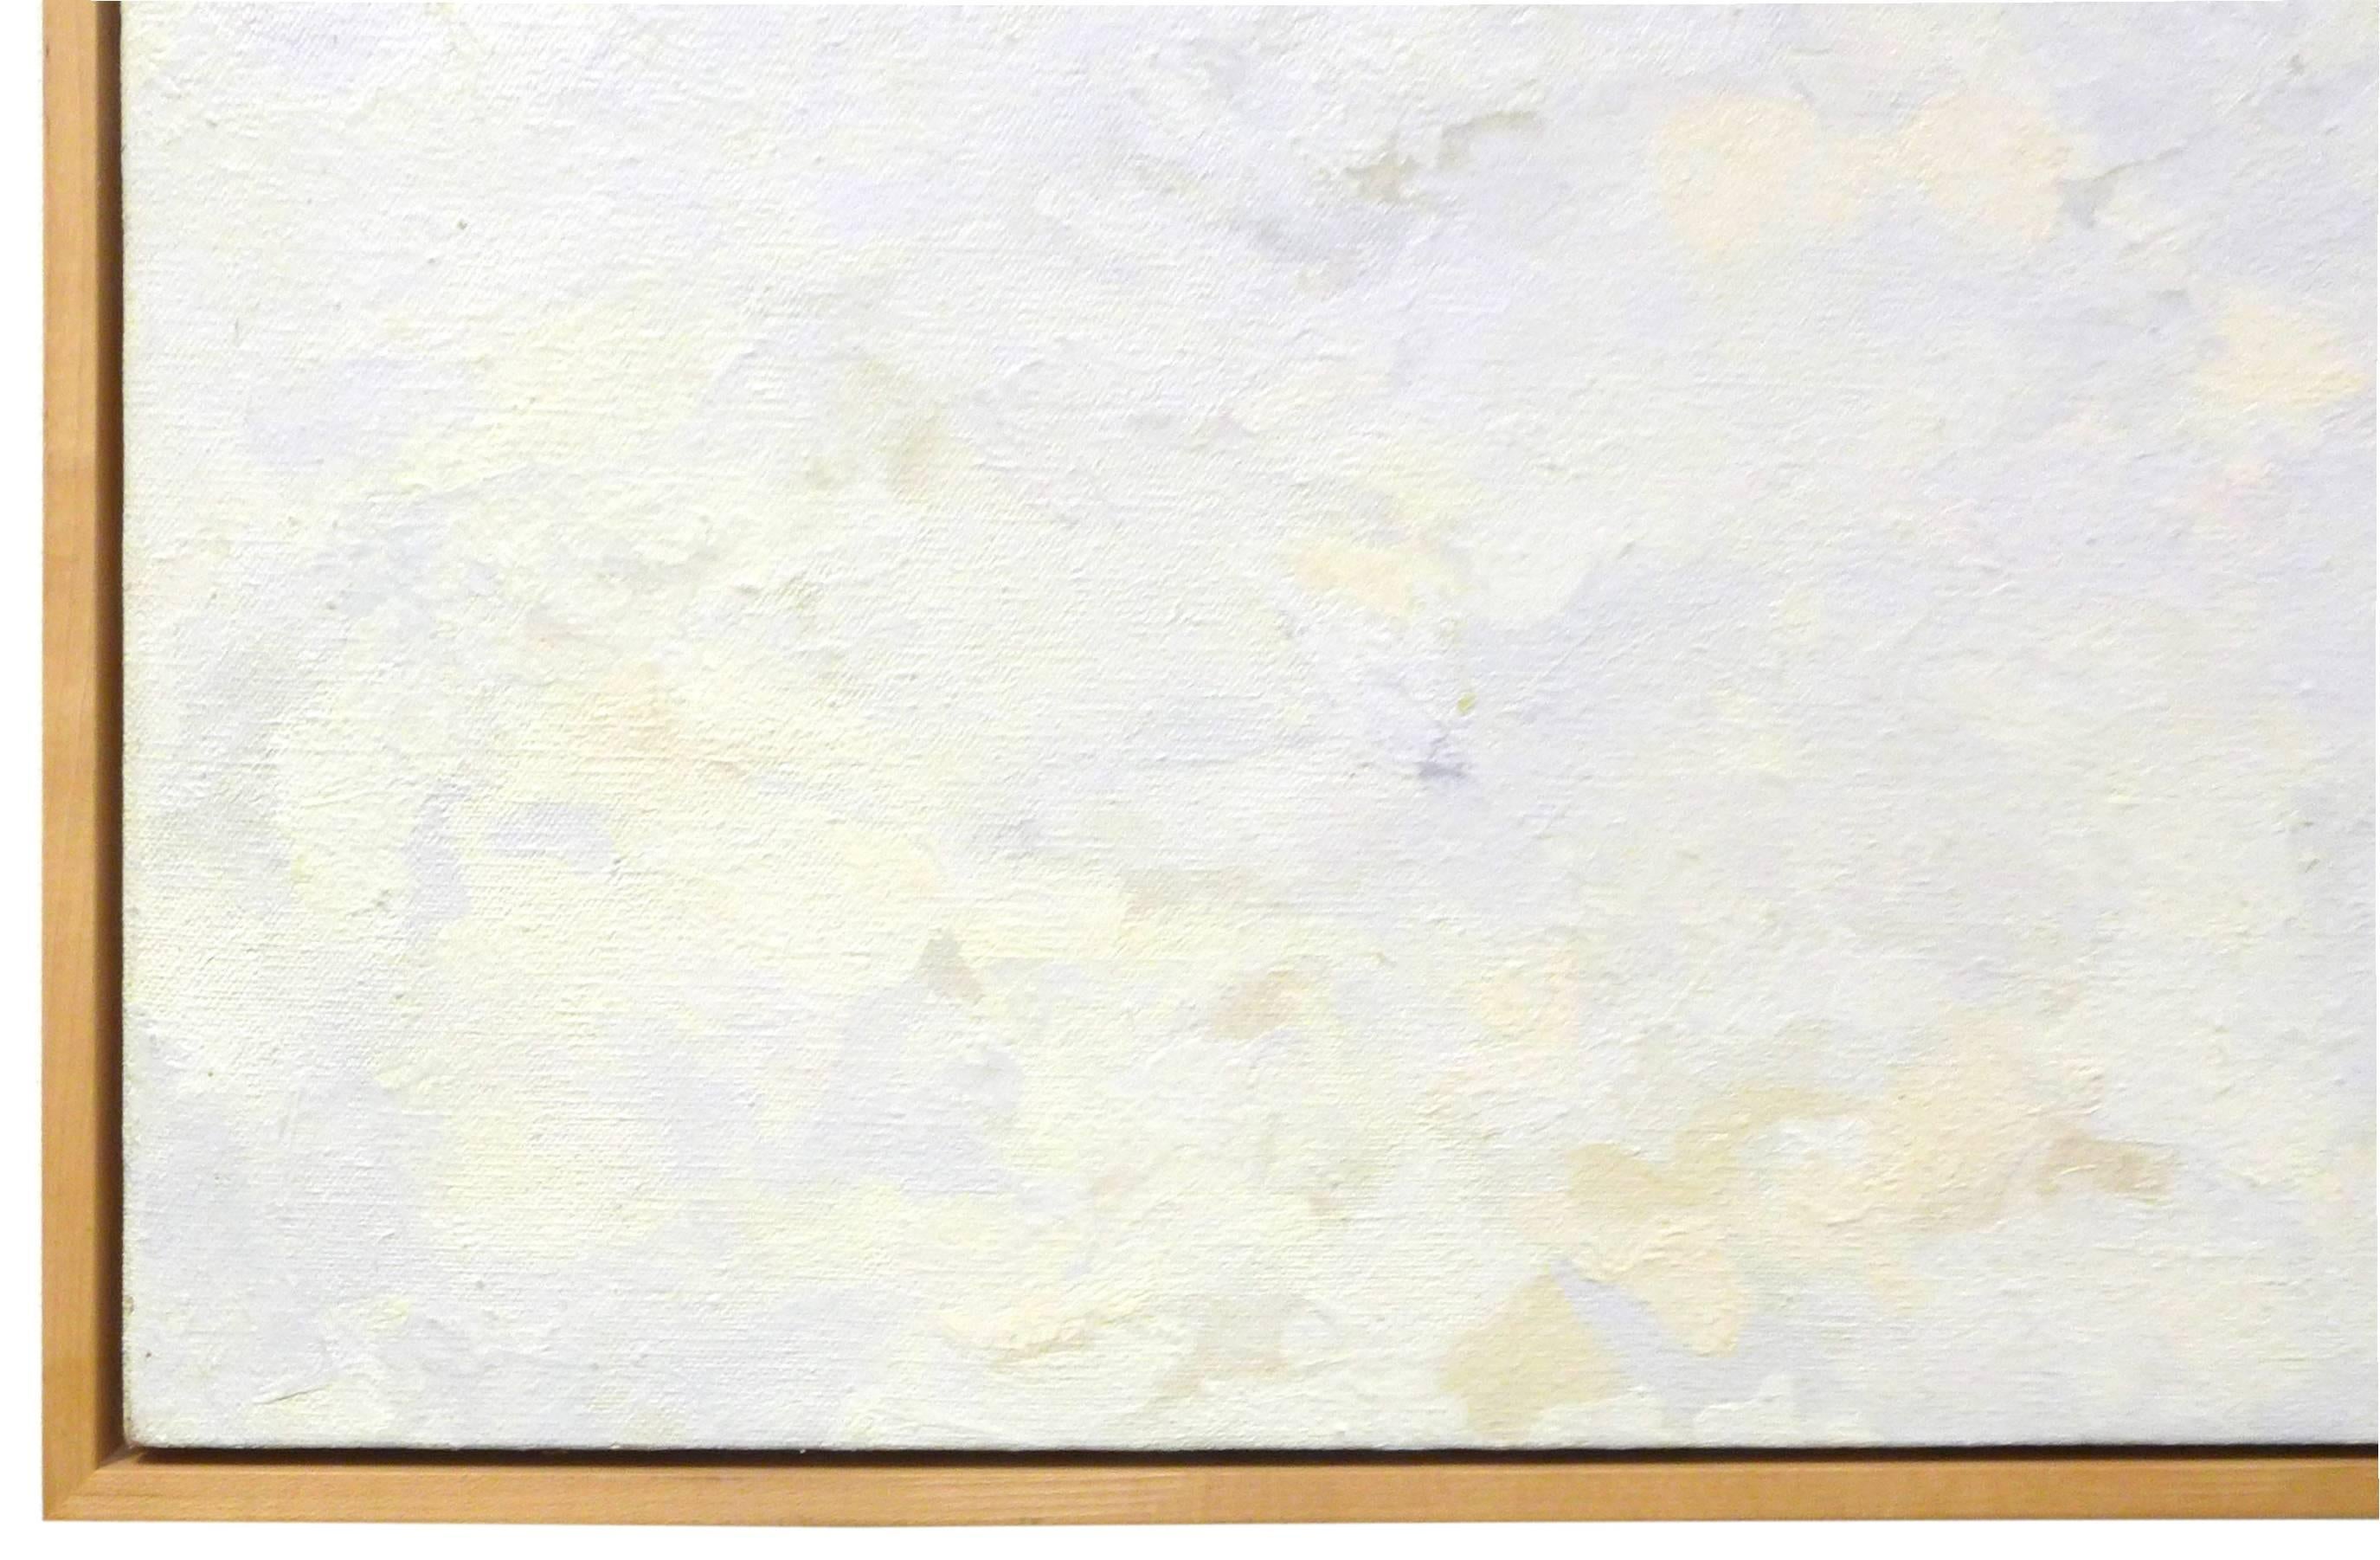 A beautifully Minimalist and understated oil on canvas painting. Subtle white, off-white. light blue and light grey tones create an abstract, almost sky-like composition. A very soothing yet visually alluring work. Beautifully framed in a simple,